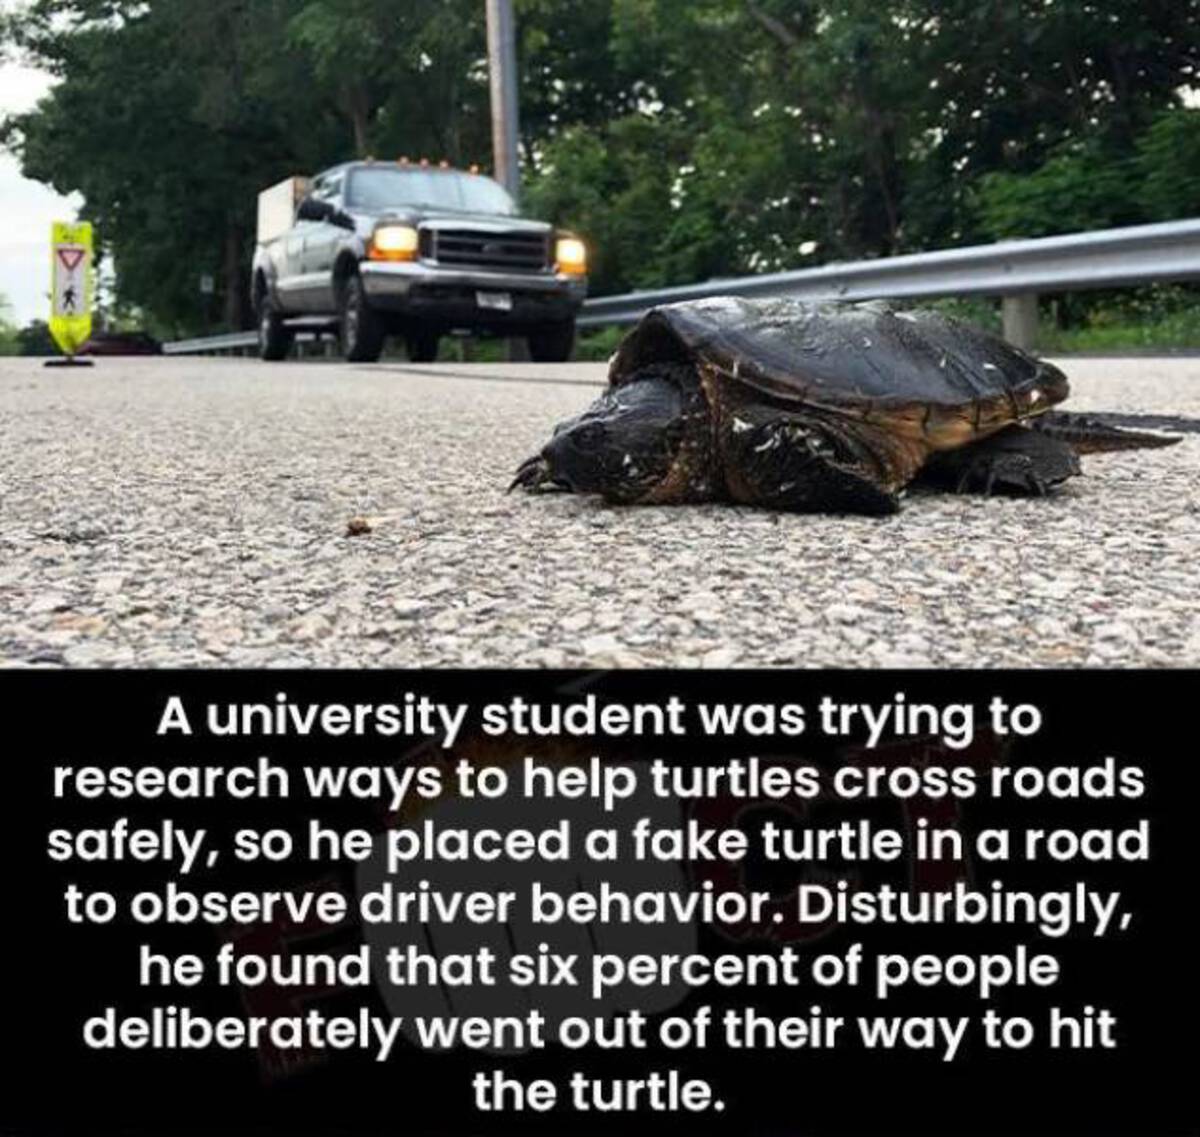 chelonoidis - A university student was trying to research ways to help turtles cross roads safely, so he placed a fake turtle in a road to observe driver behavior. Disturbingly, he found that six percent of people deliberately went out of their way to hit